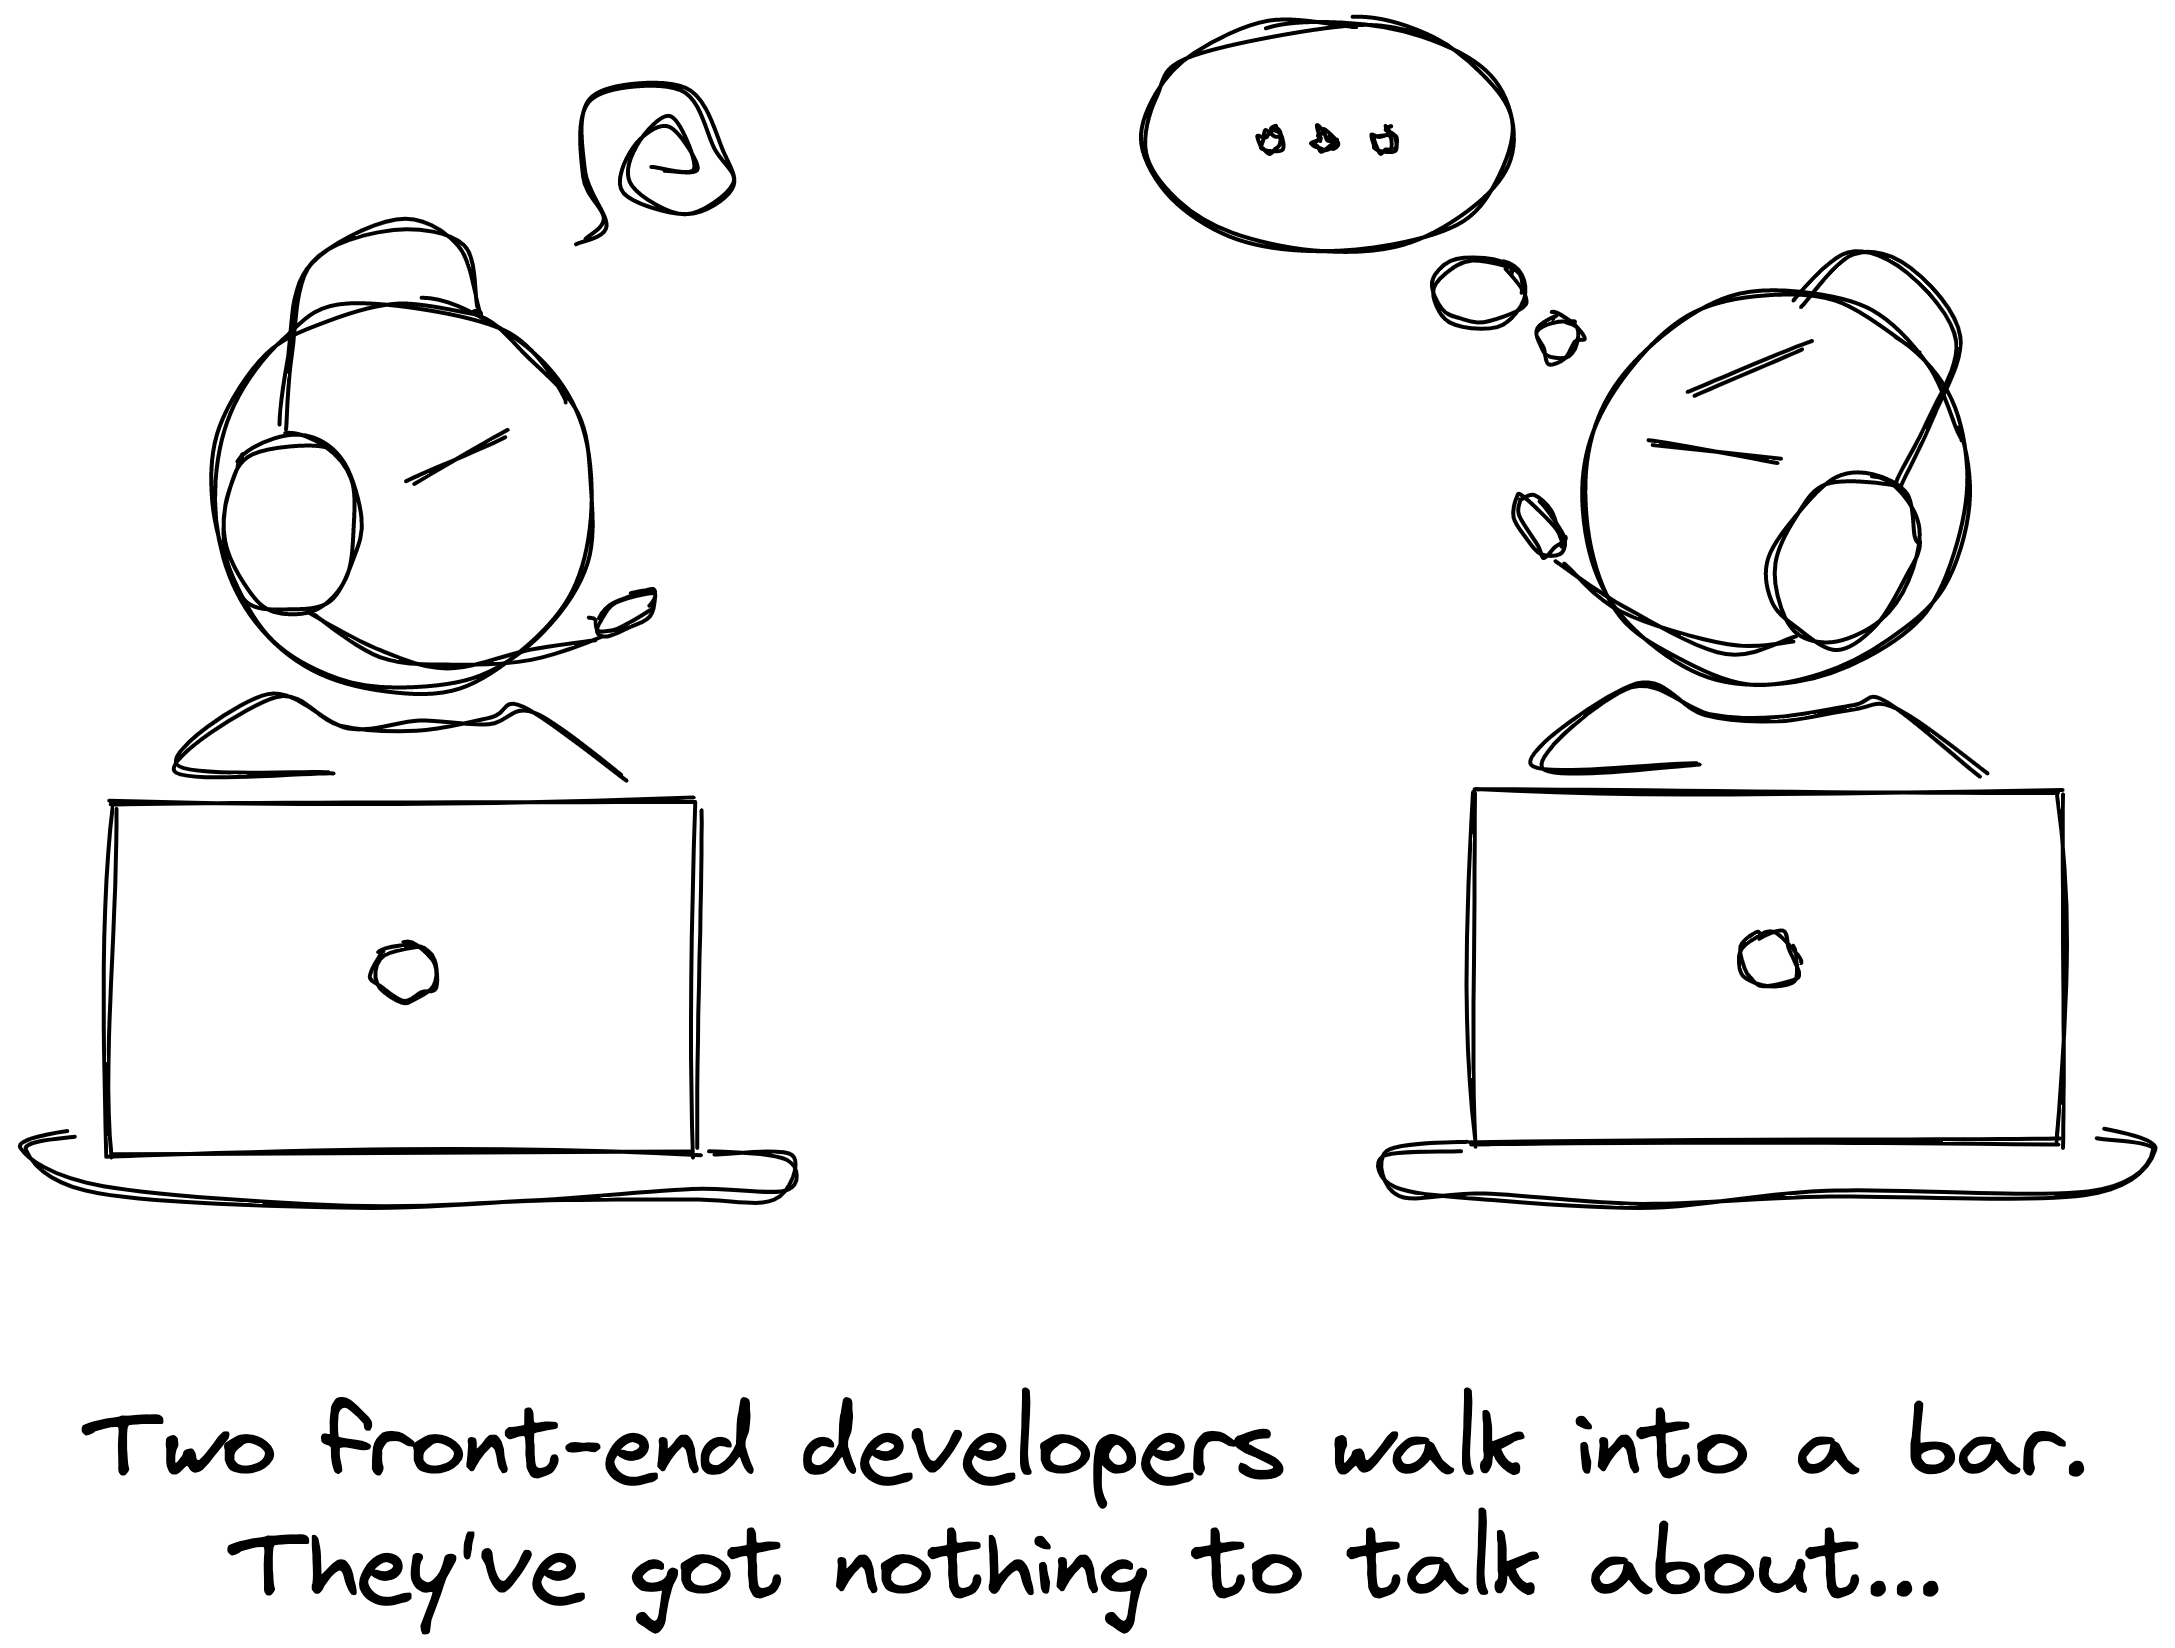 Two front-end developers walk into a bar. They've got nothing to talk about...